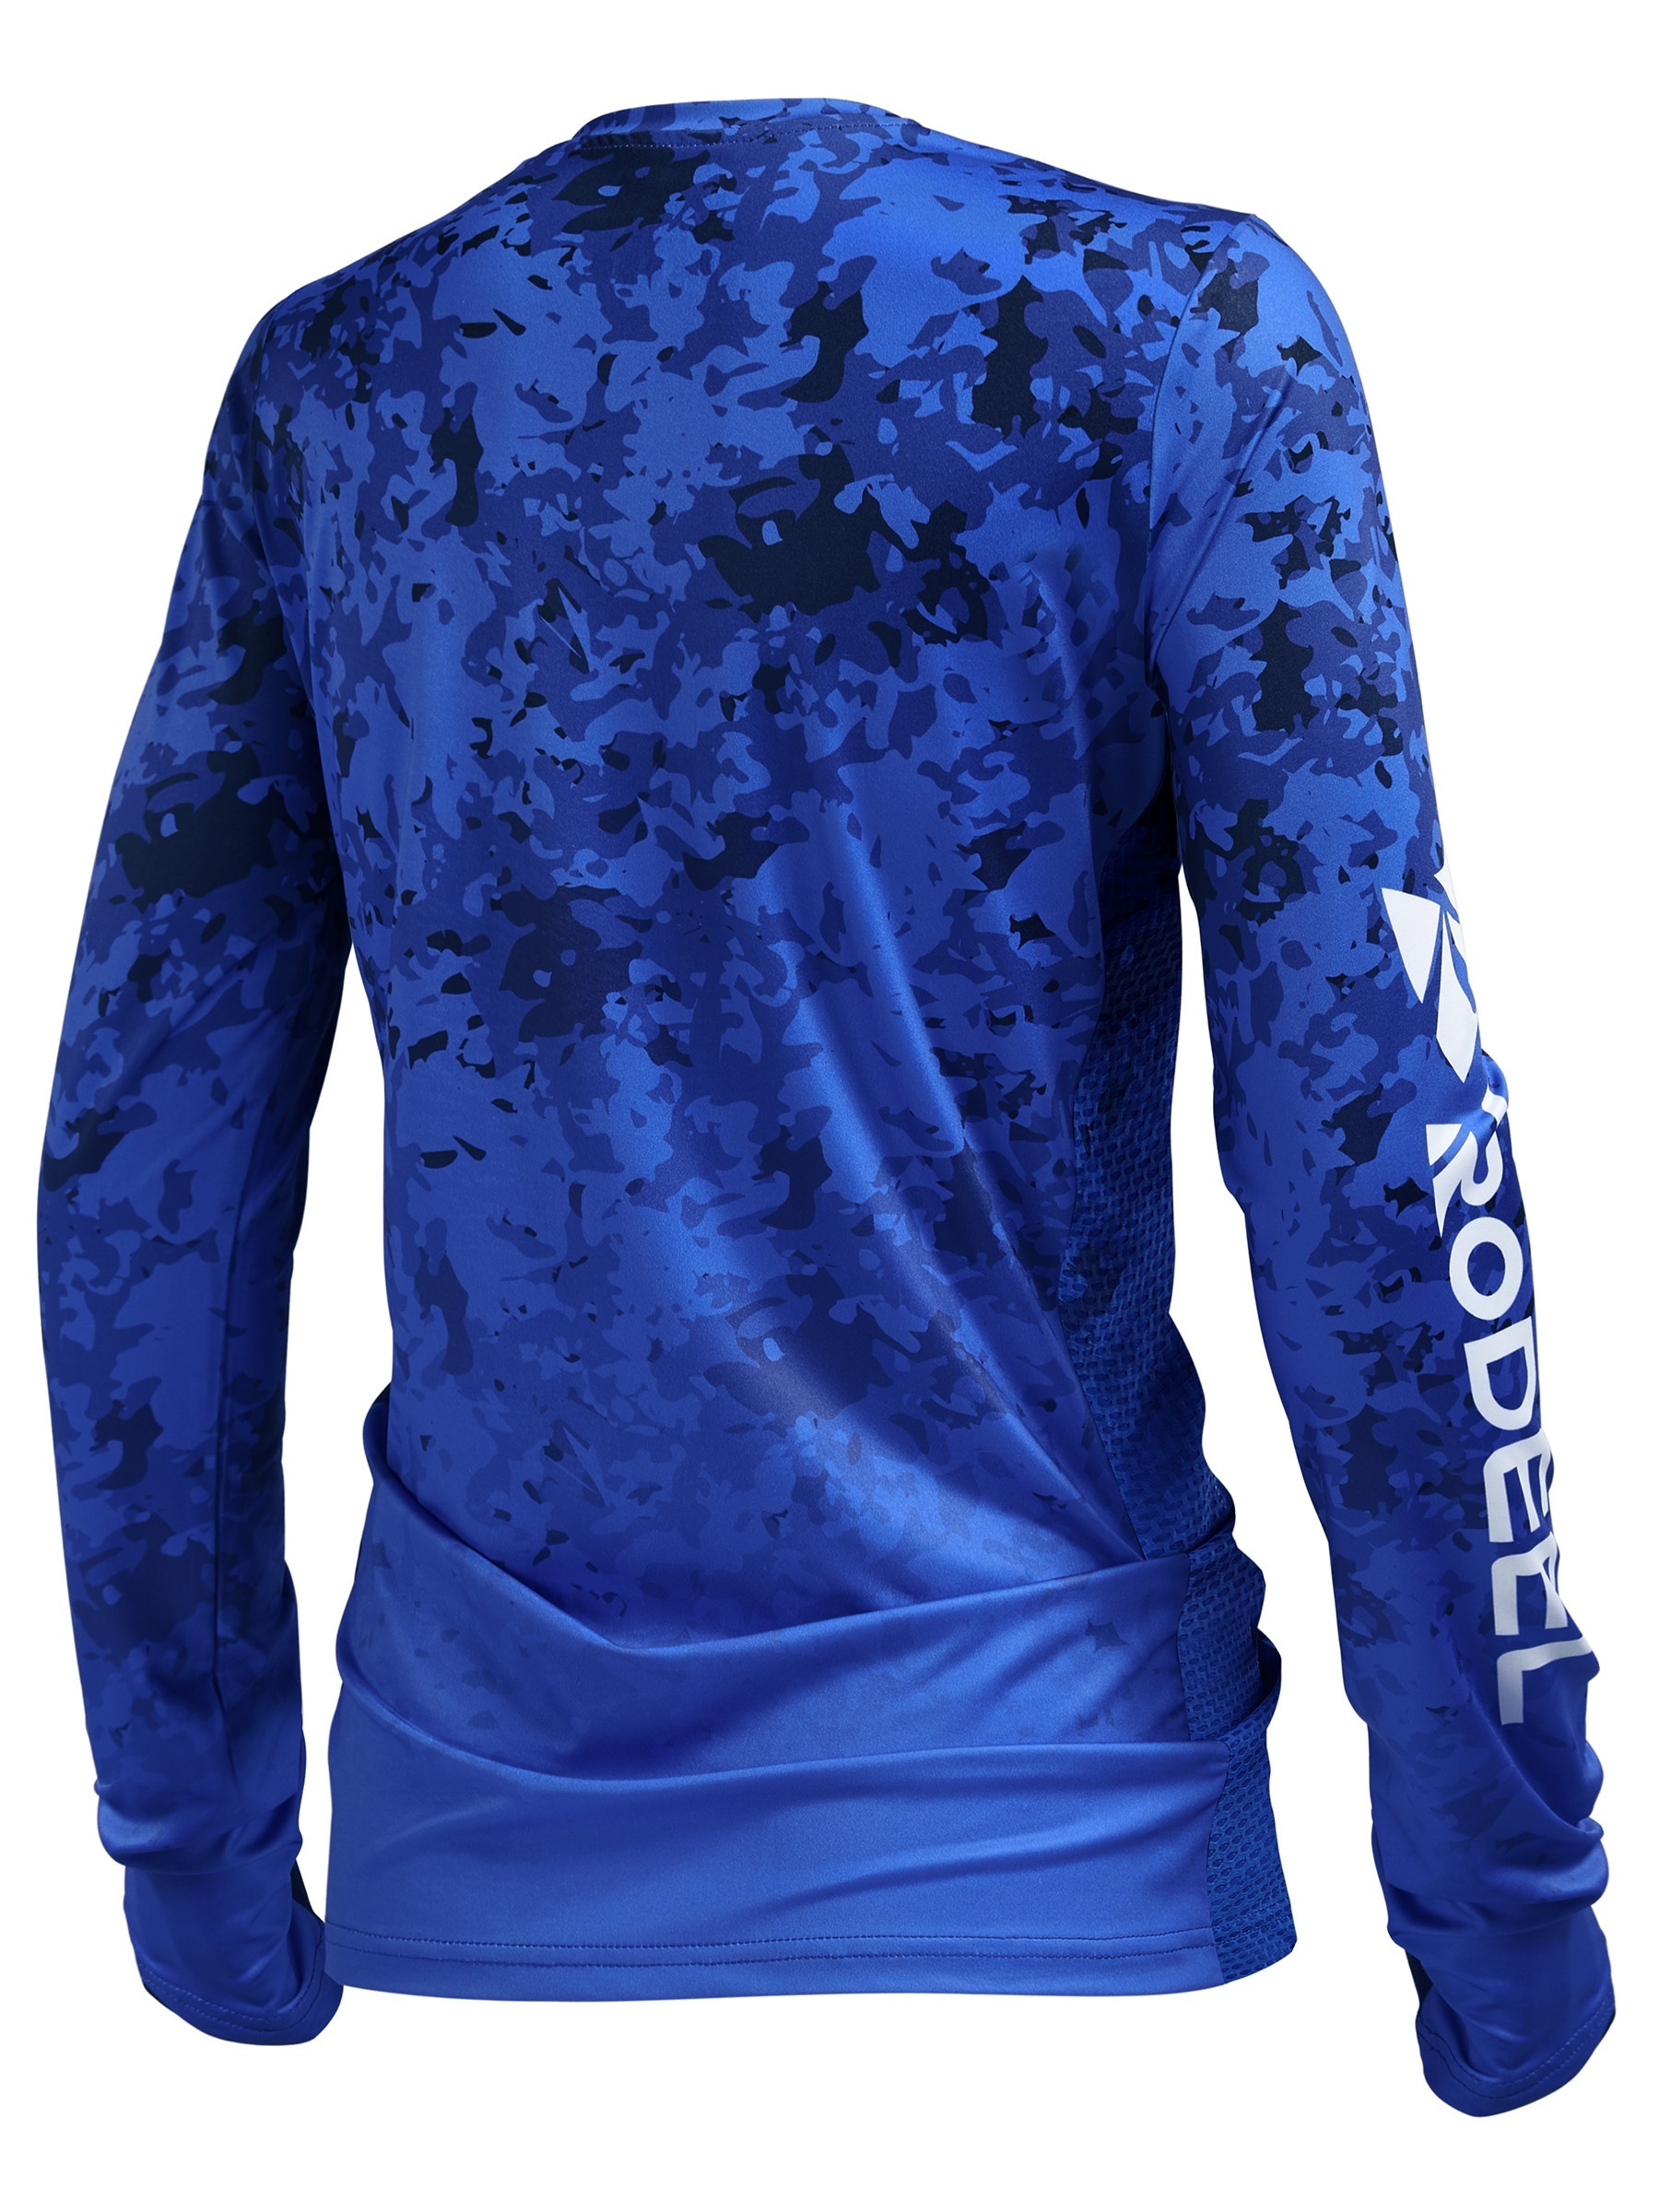 Long Sleeve Sport Running Quick Drying Shirts, Moisture-Wicking UPF 50 Athletic Top with Thumb Hole, Women's Tops,Temu